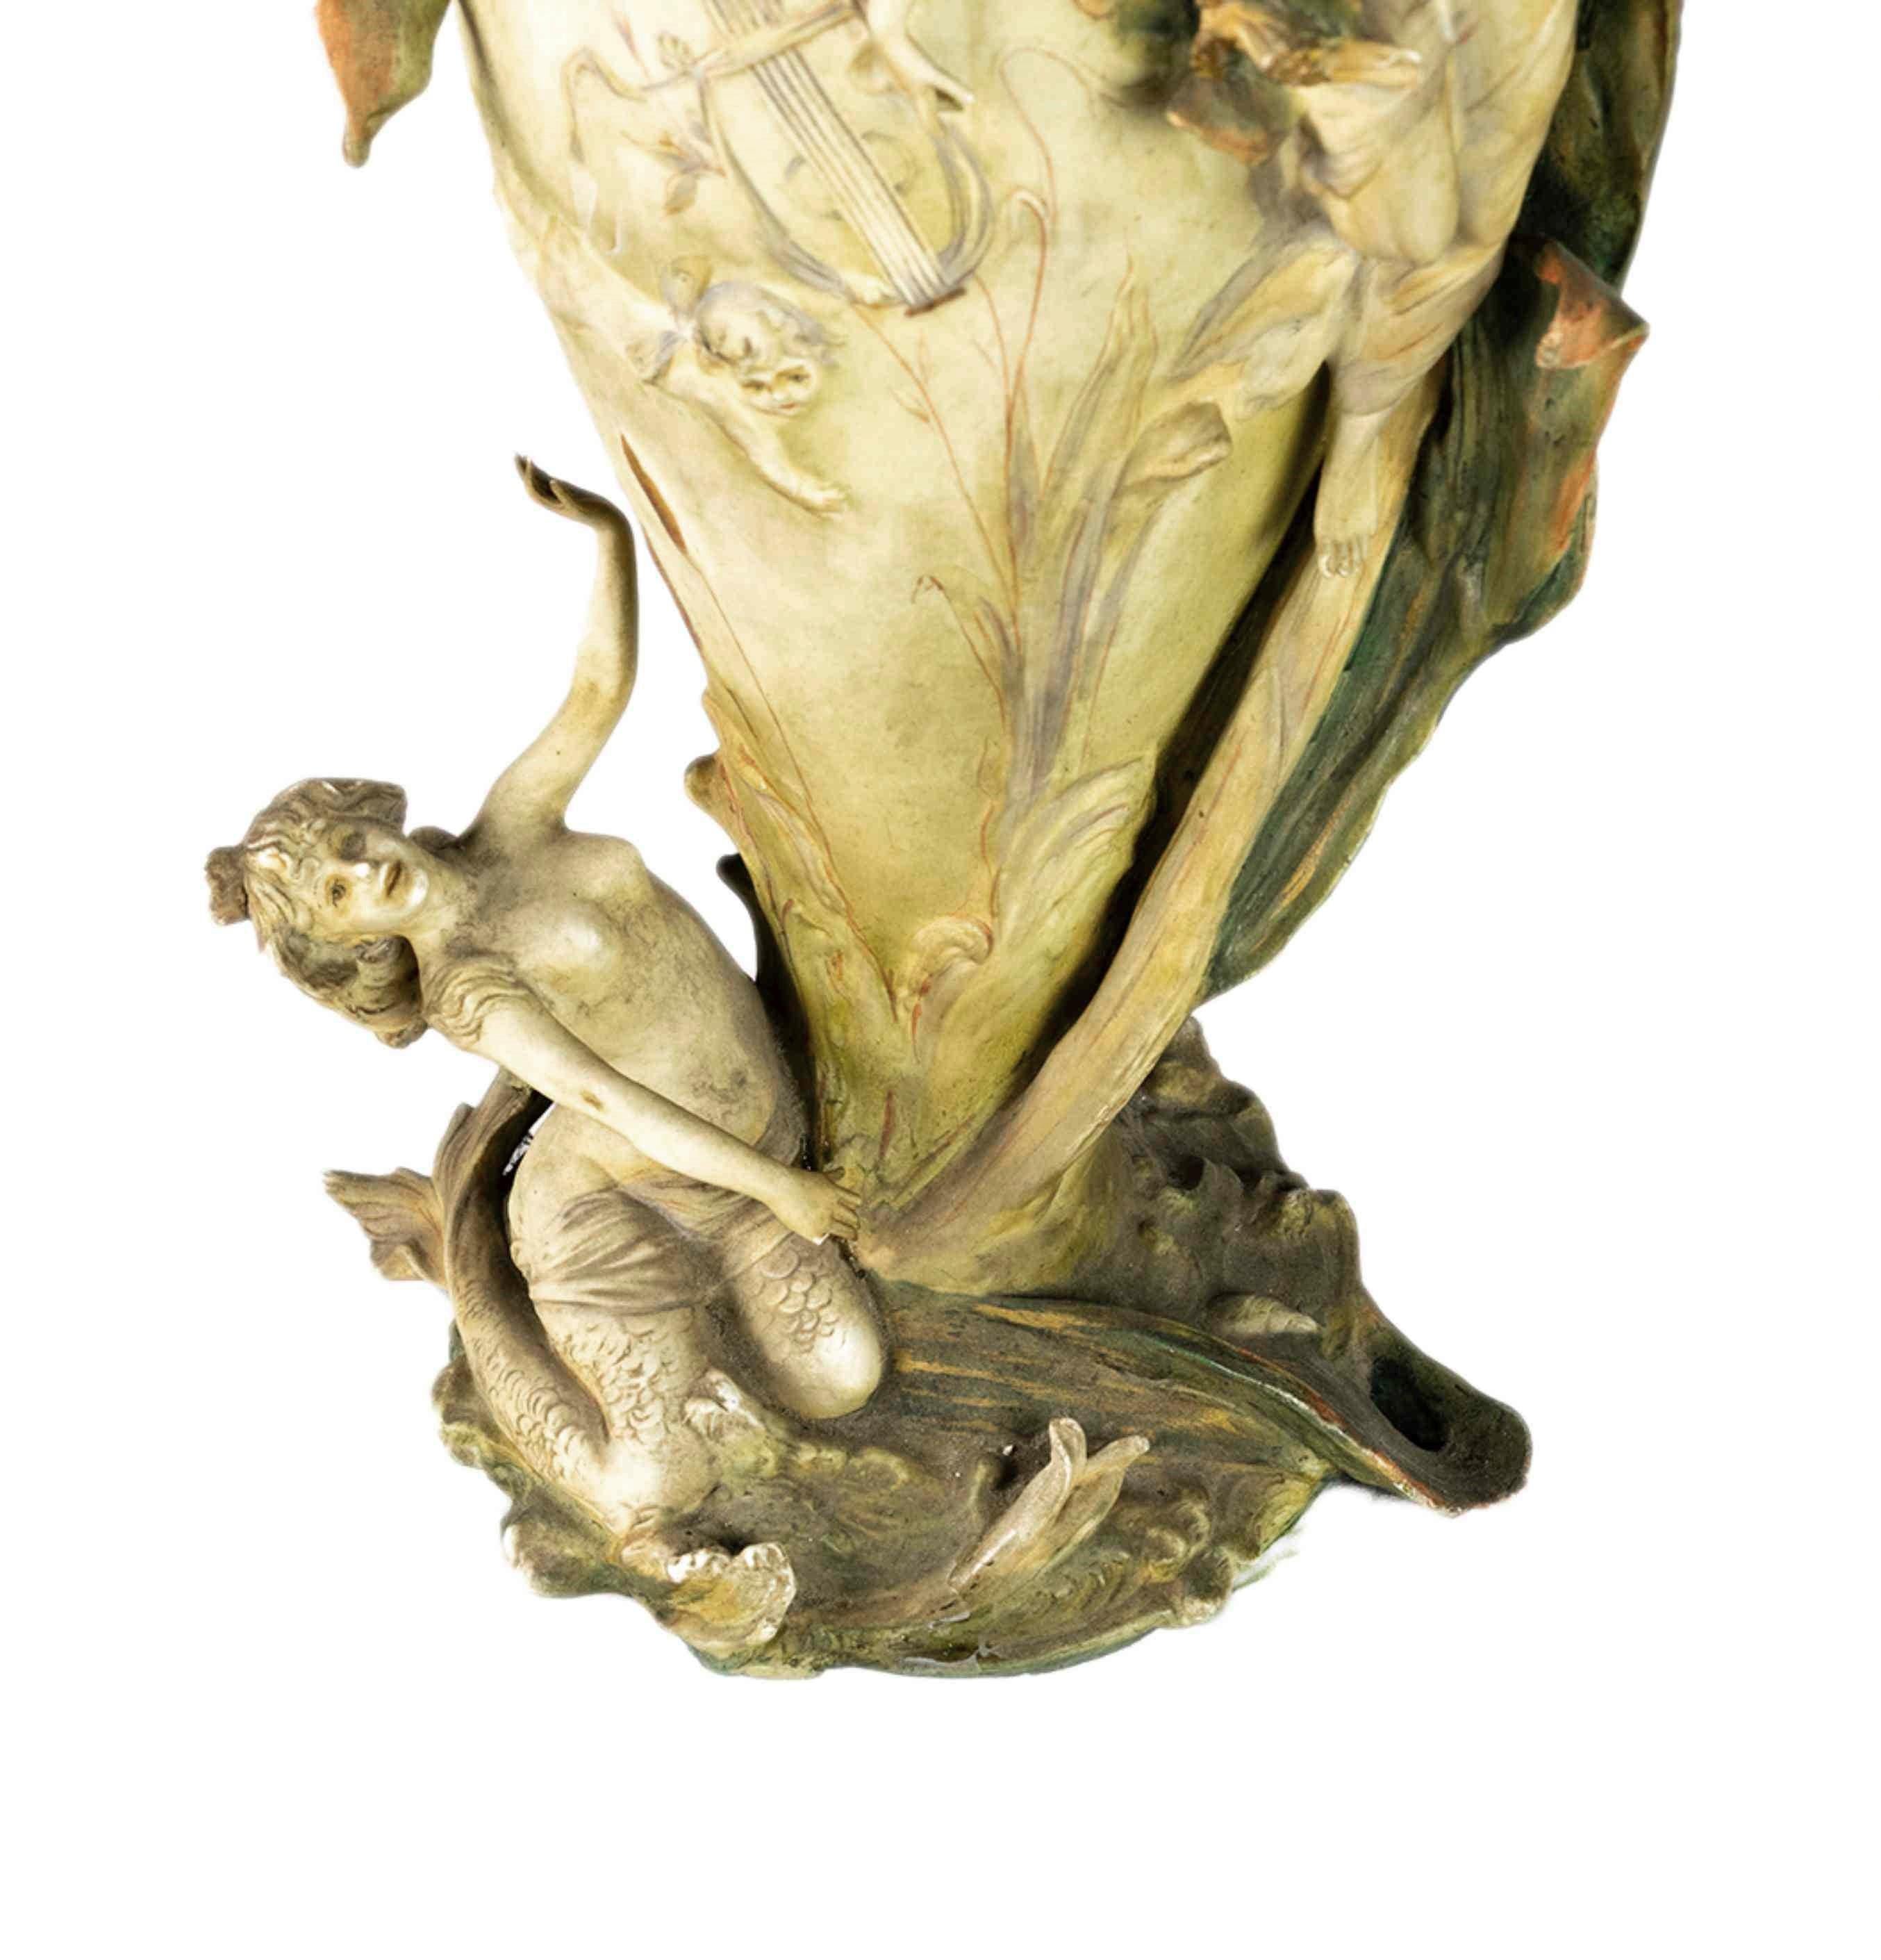 An amazing Jugendstil Style amphora from Rudolstadt, Thuringia hailing from the Triebner Ens Manufacture and the artist Karl Ens Volkstedt. Vase decorated with a iris flower form neck and reclining maidens in the upper and lower sections. Maker's